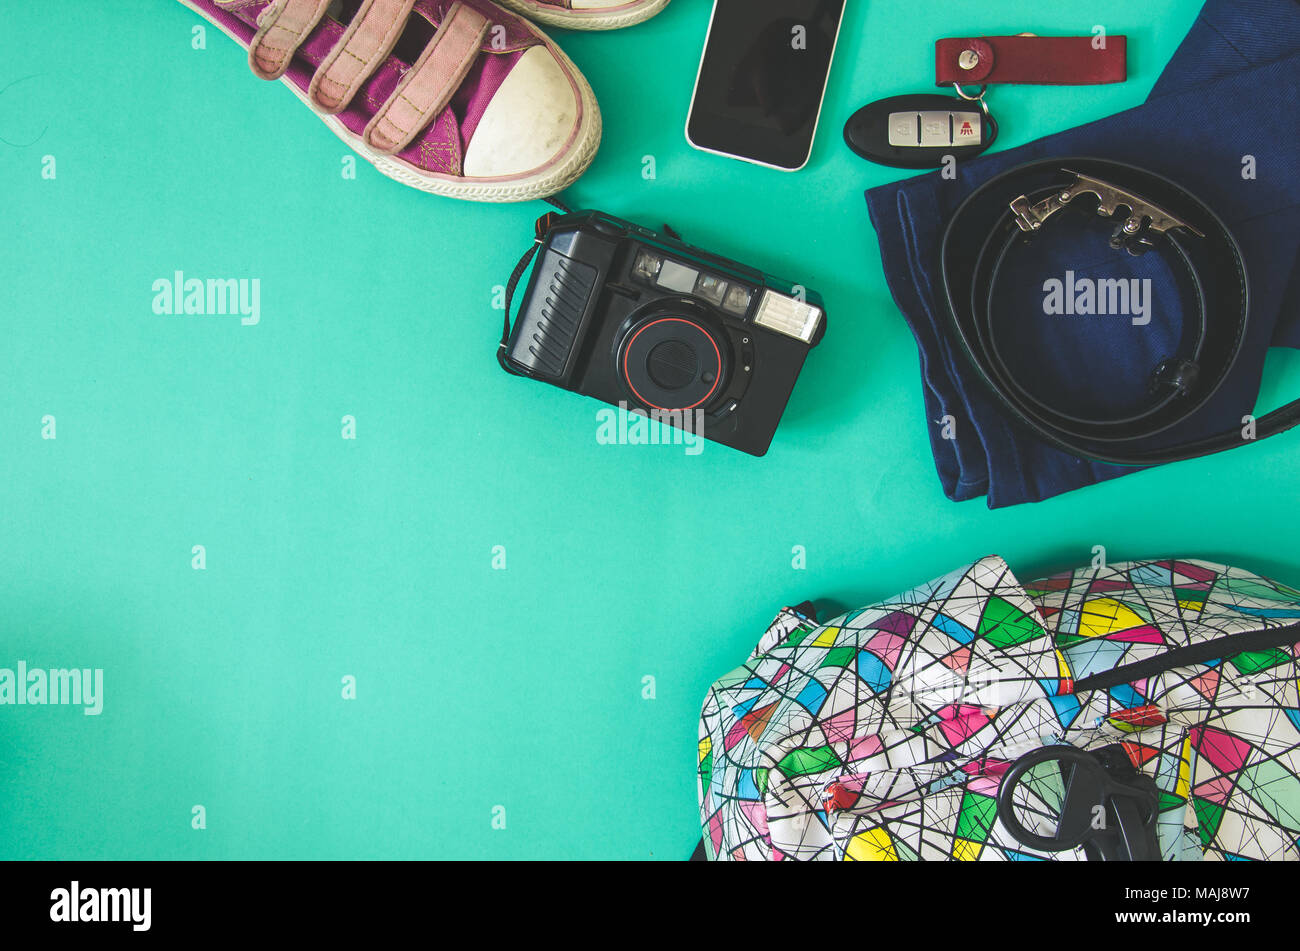 Traveler accessories. Shoes, bags and phone on the green background. Stock Photo